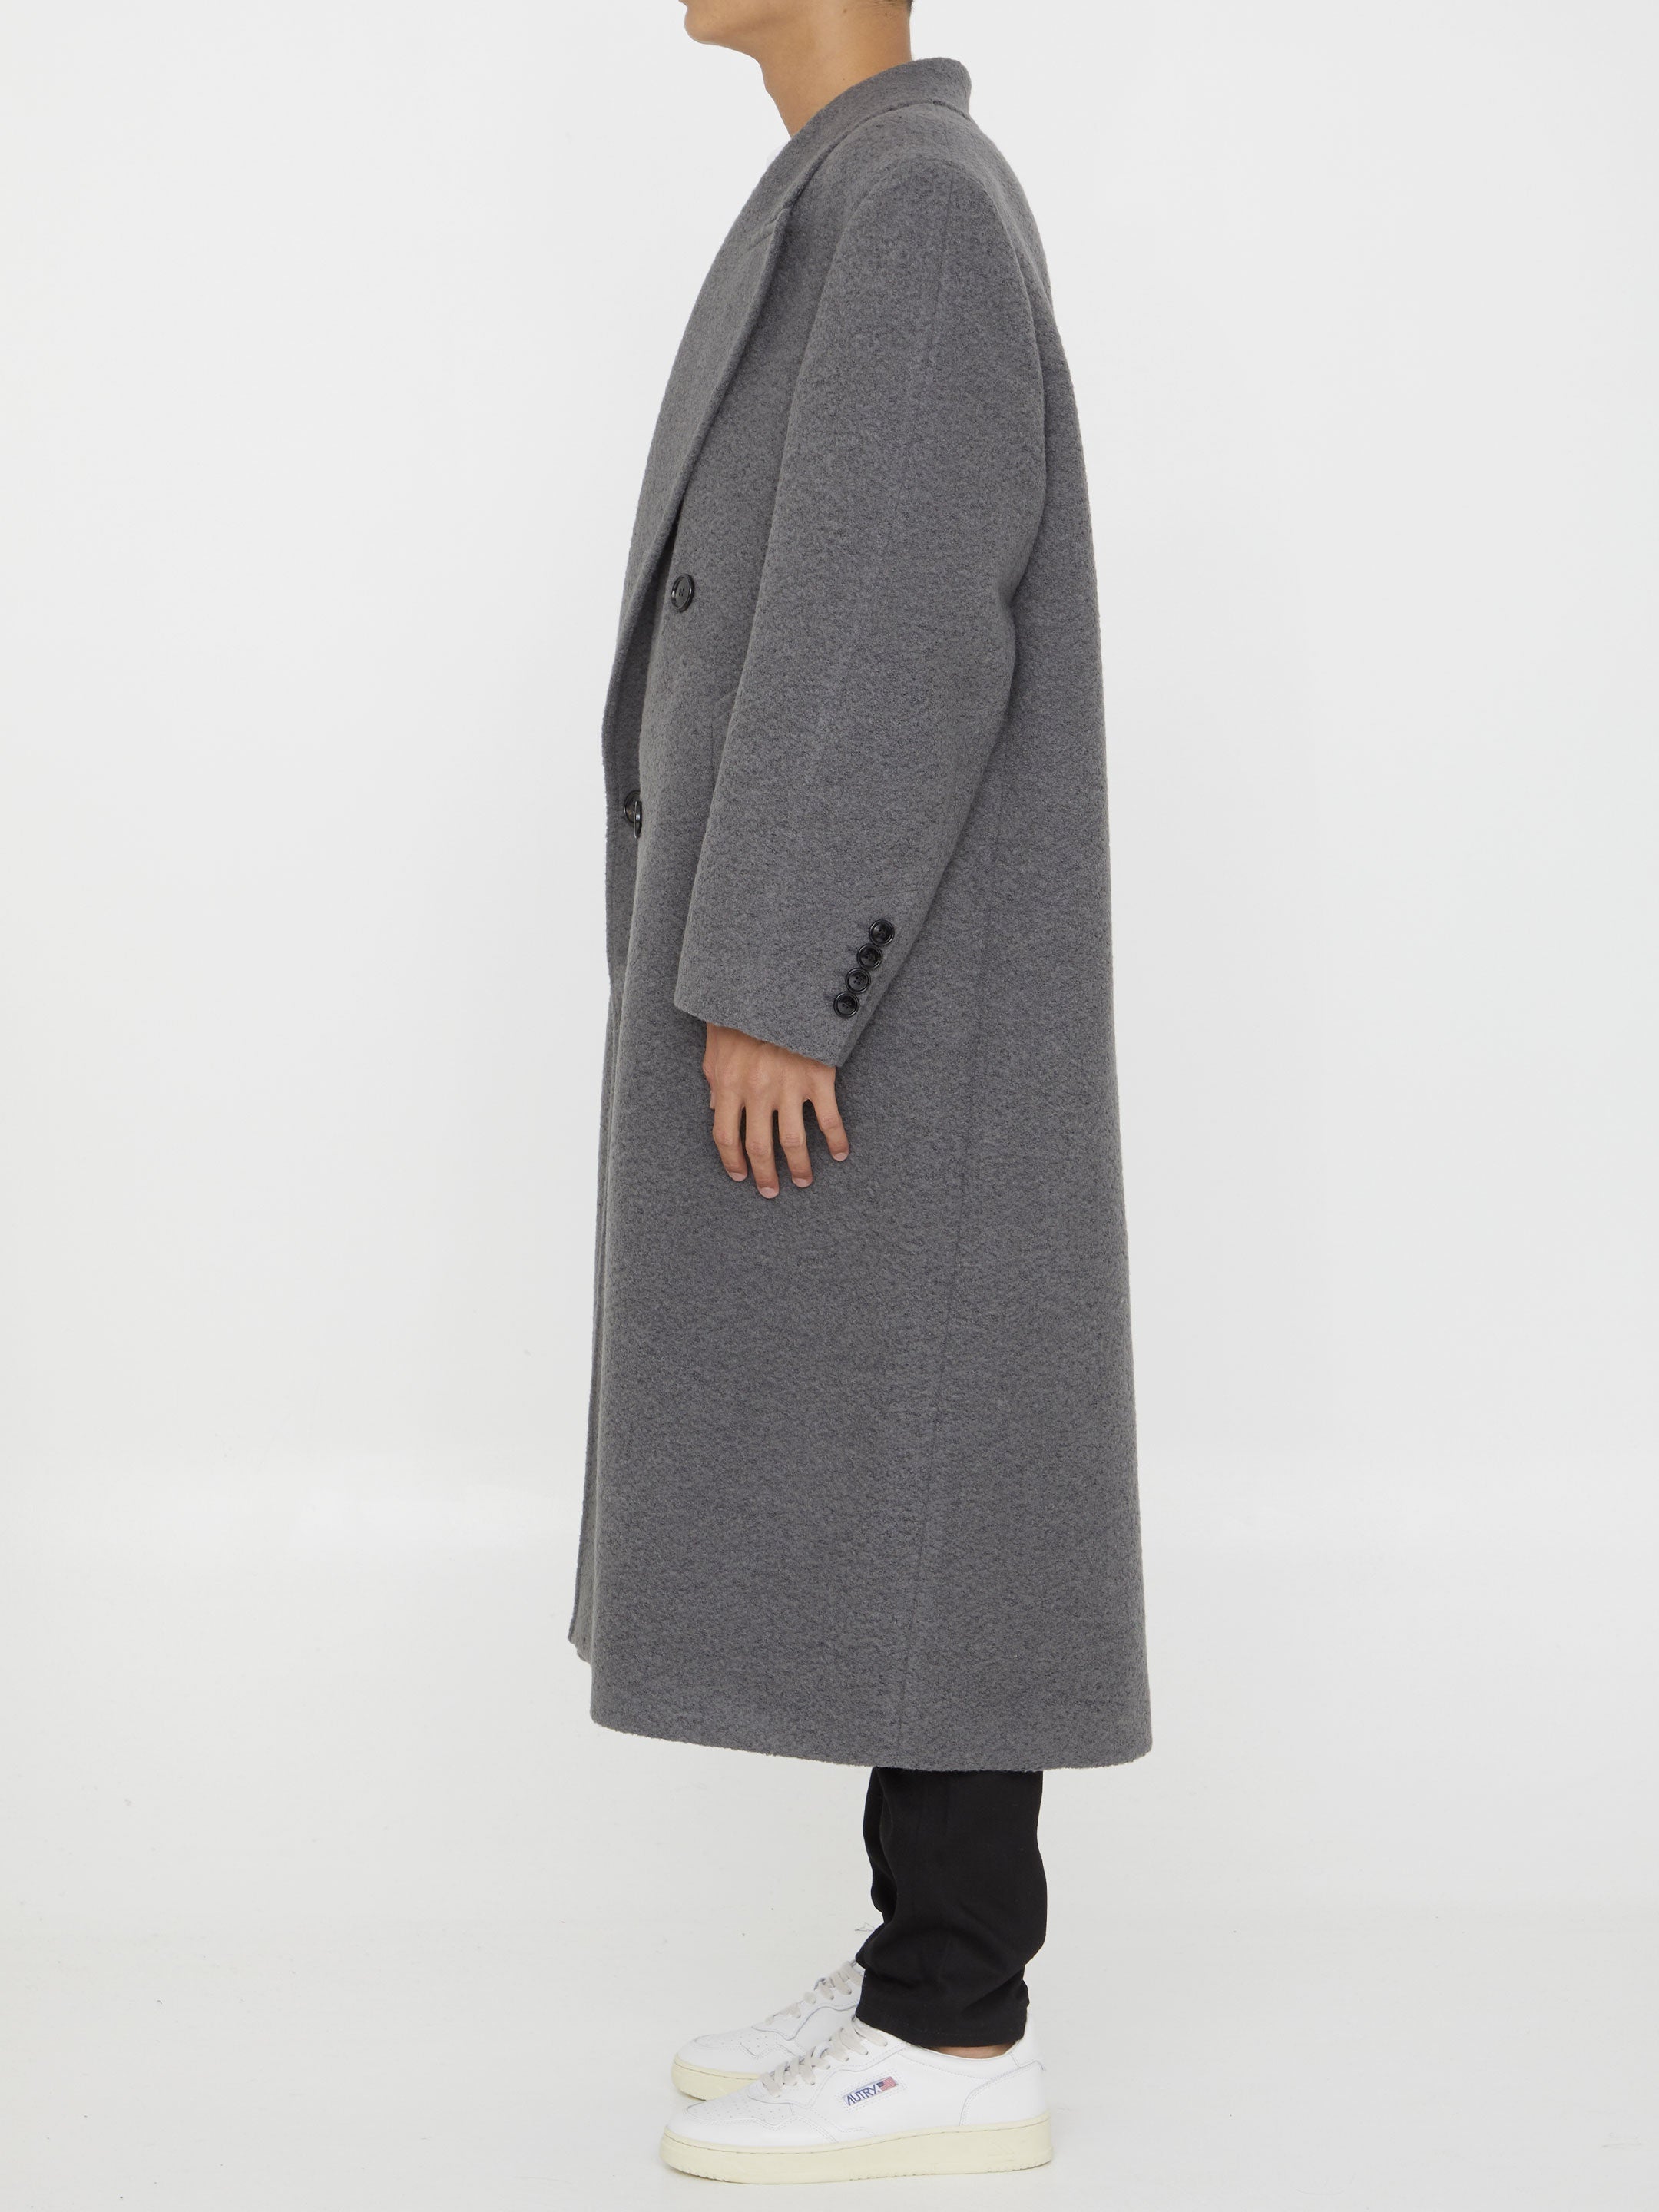 AMI-PARIS-OUTLET-SALE-Double-breasted-coat-Jacken-Mantel-48-GREY-ARCHIVE-COLLECTION-3.jpg